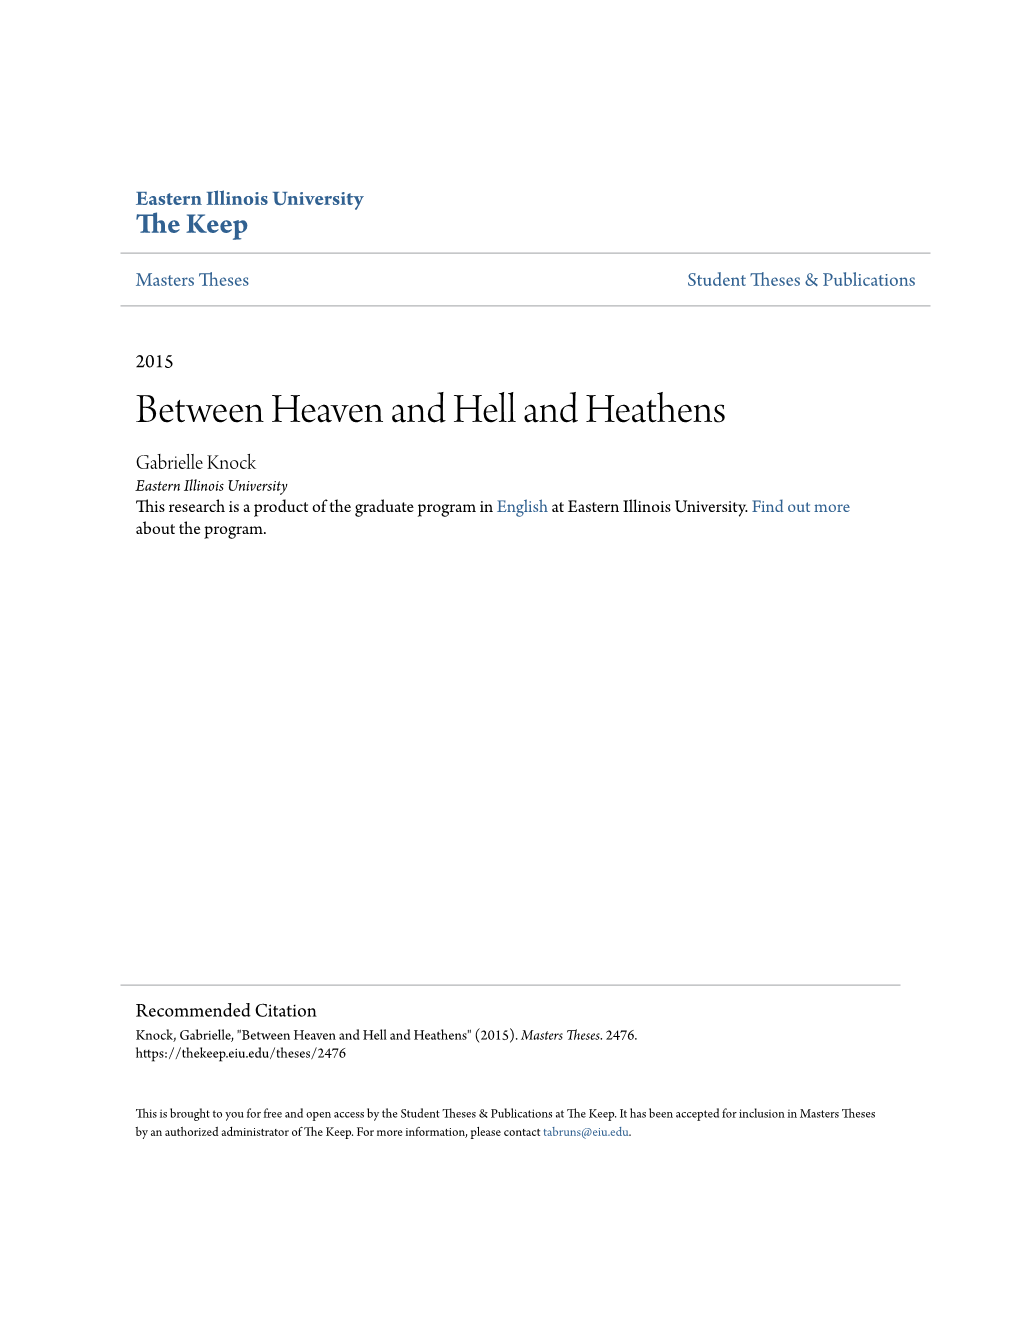 Between Heaven and Hell and Heathens